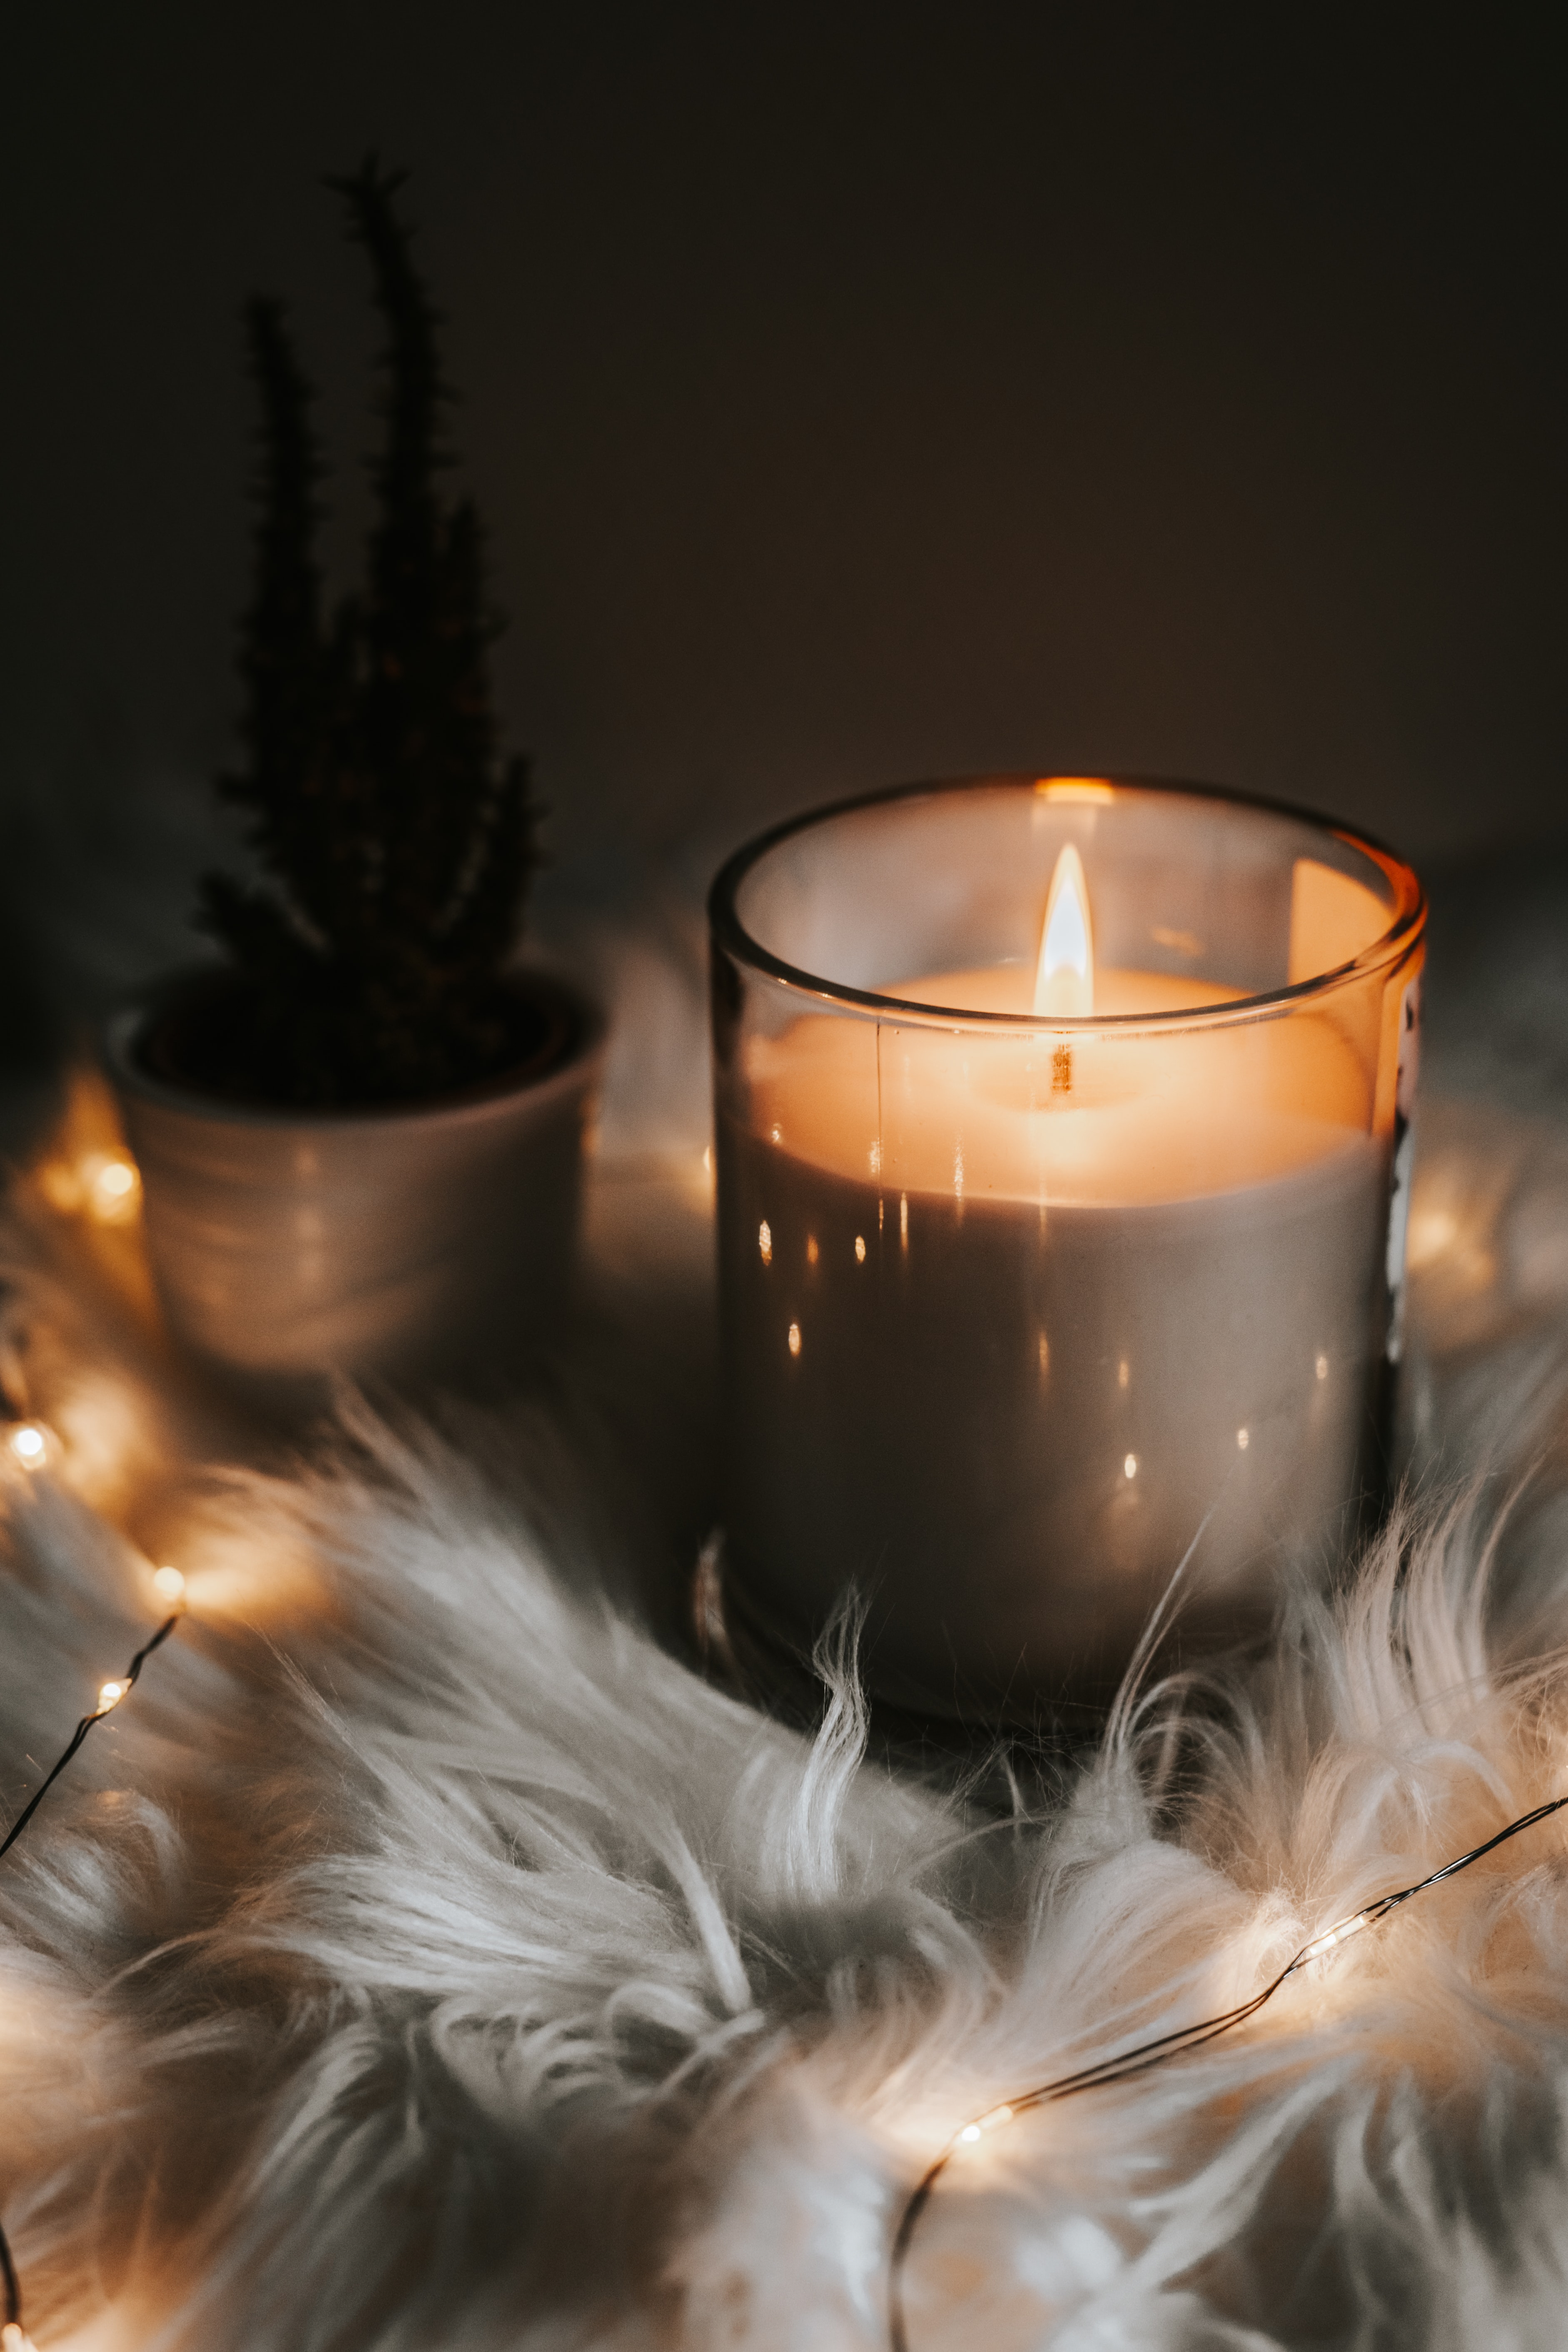 garland, candle, comfort, miscellanea, fire, flame, miscellaneous, coziness